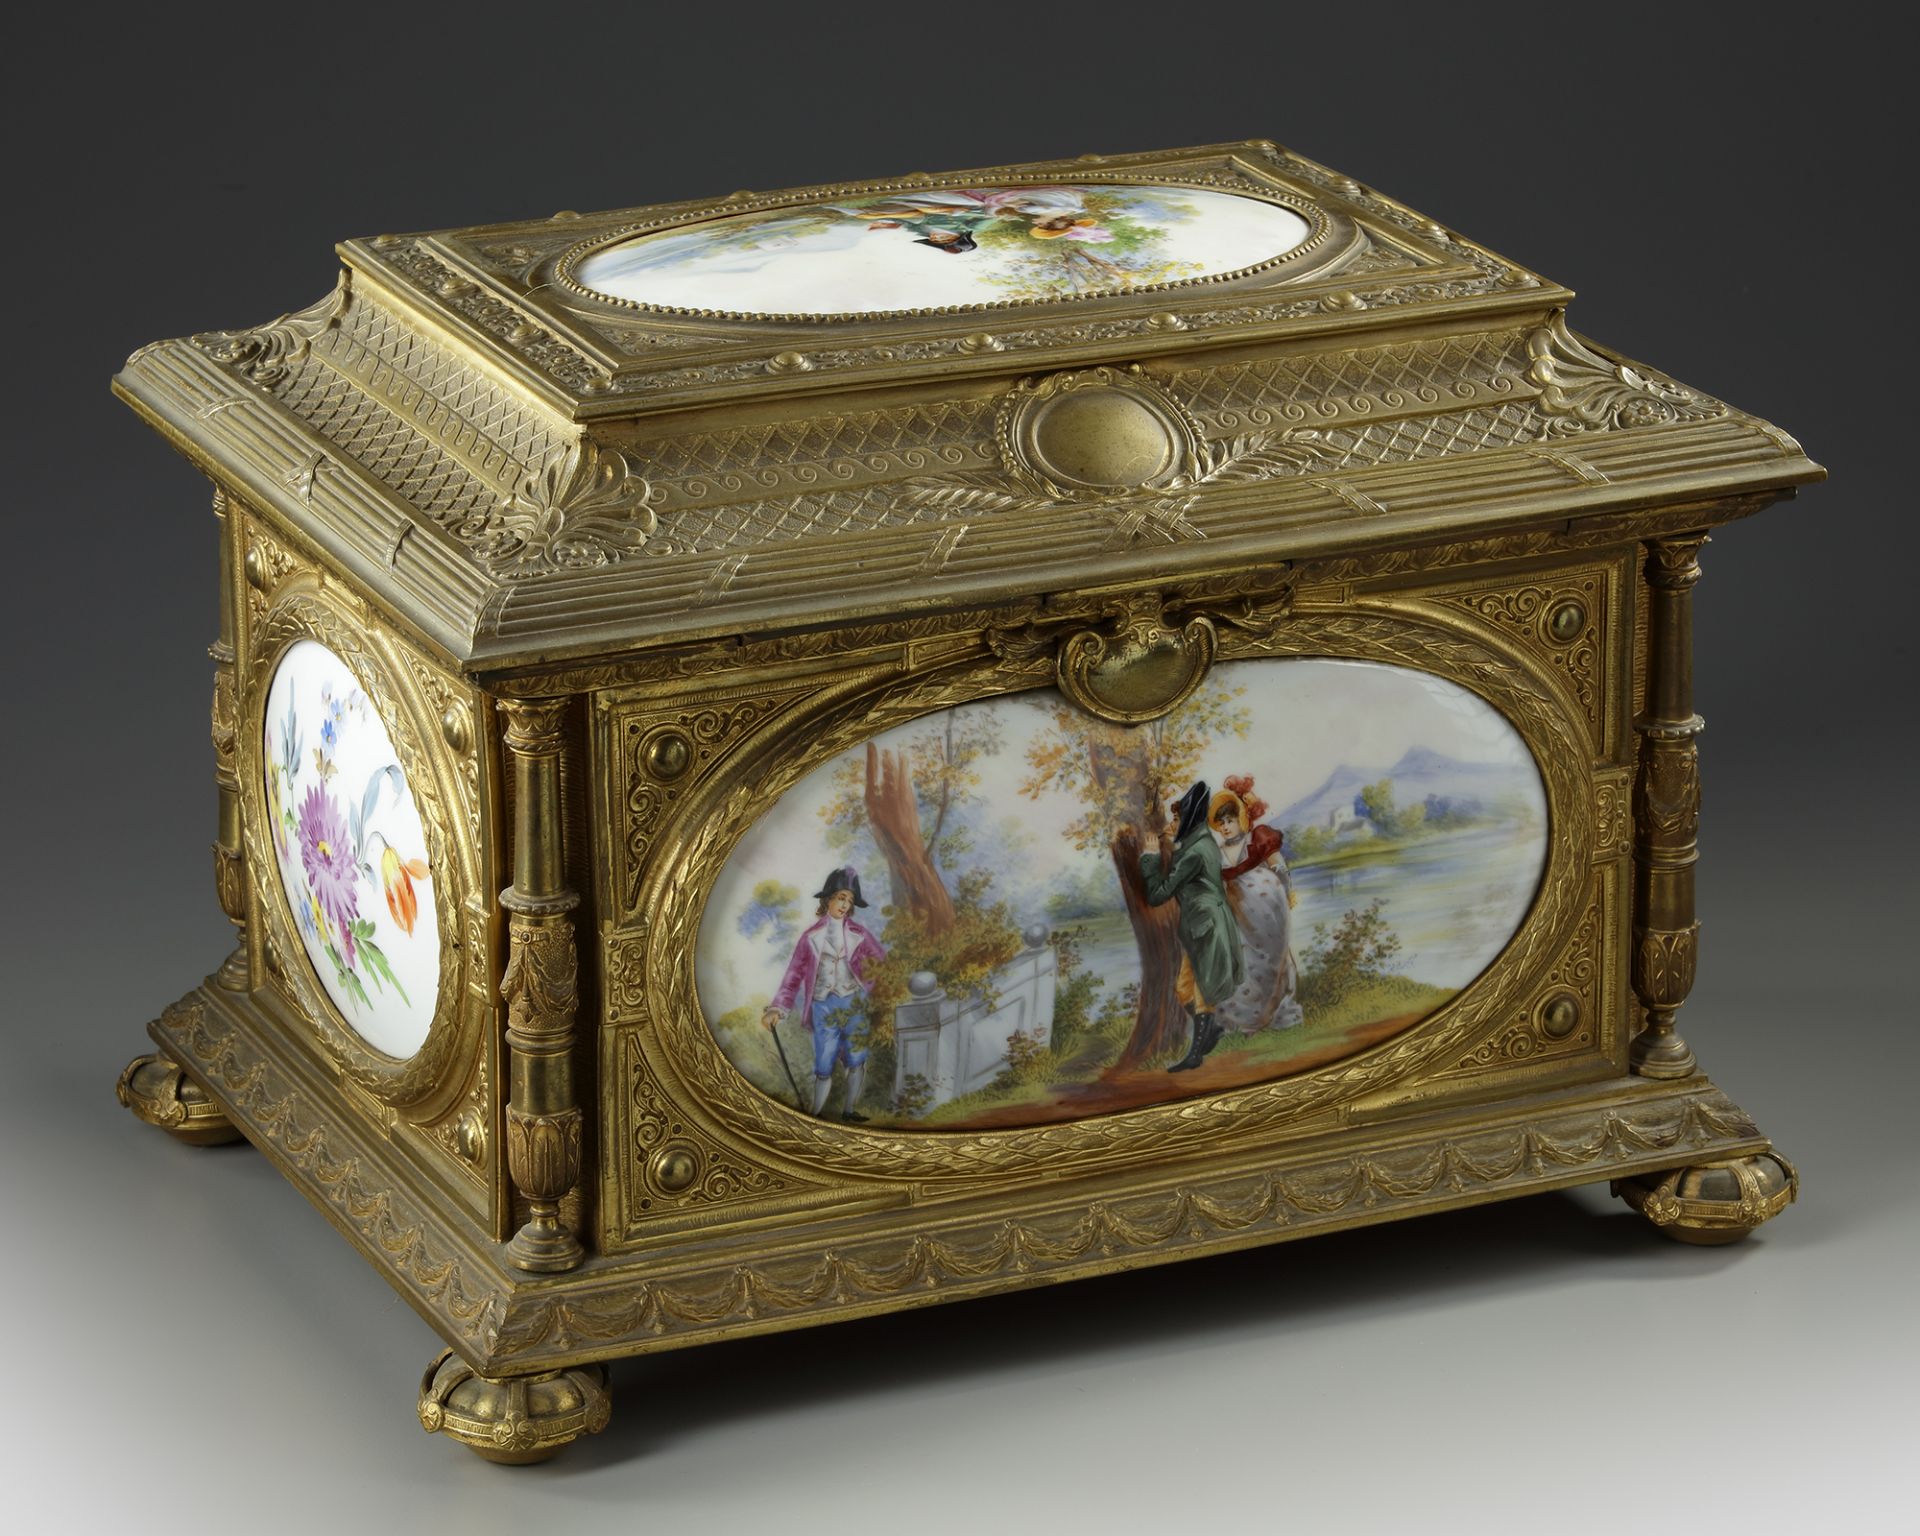 A LARGE JEWELRY BOX, SEVRES PORCELAIN, 19TH CENTURY - Image 2 of 5